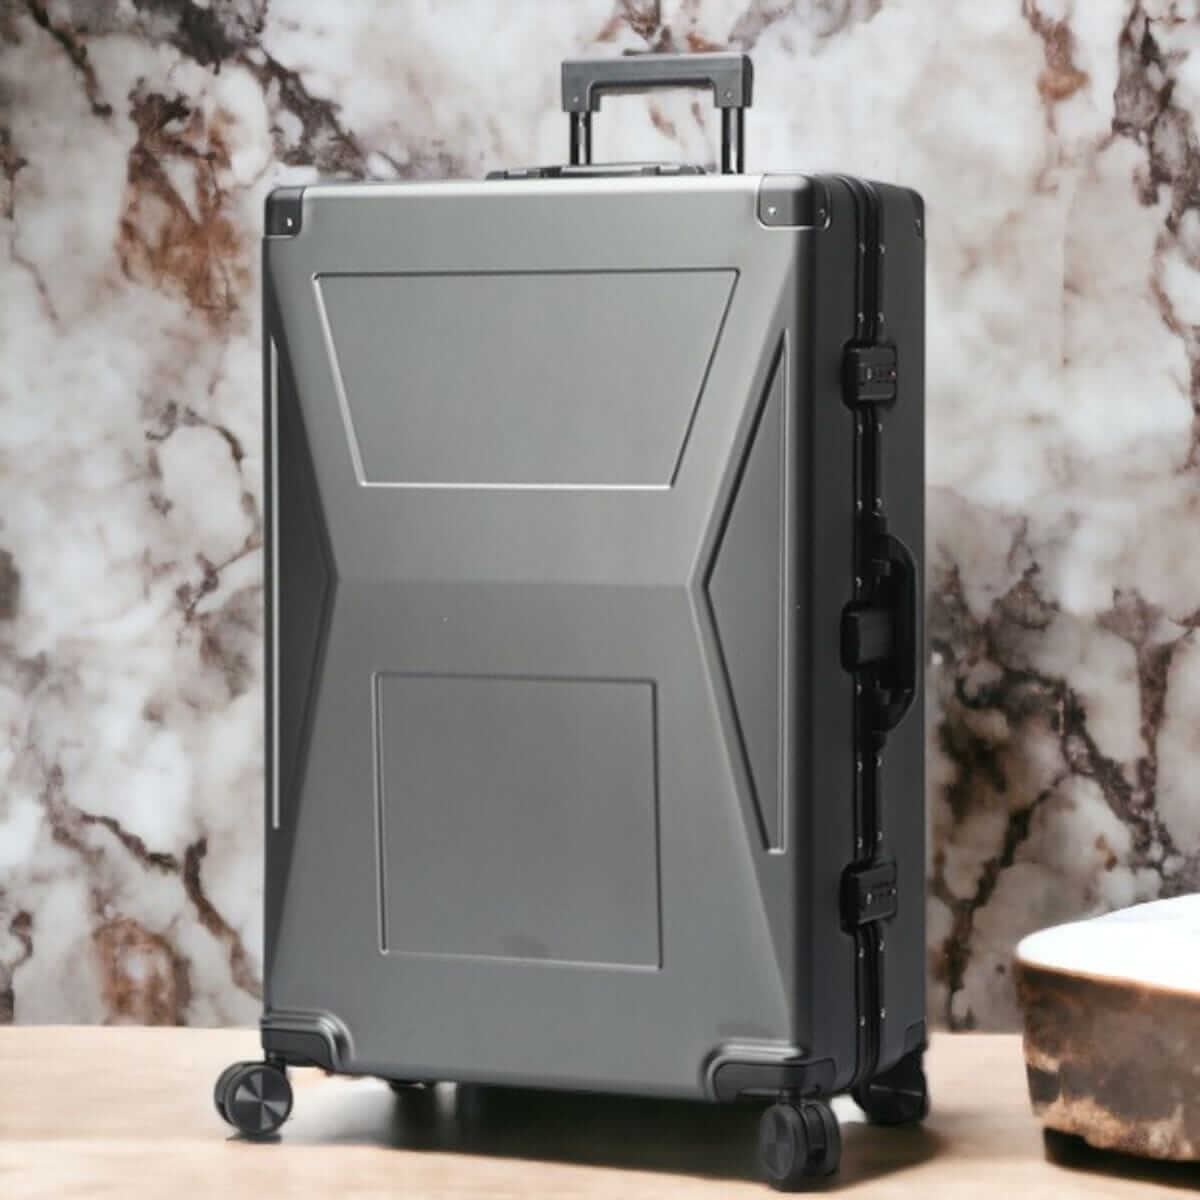 CyberLuggage 94L Checked Suitcase Luggage in Gray